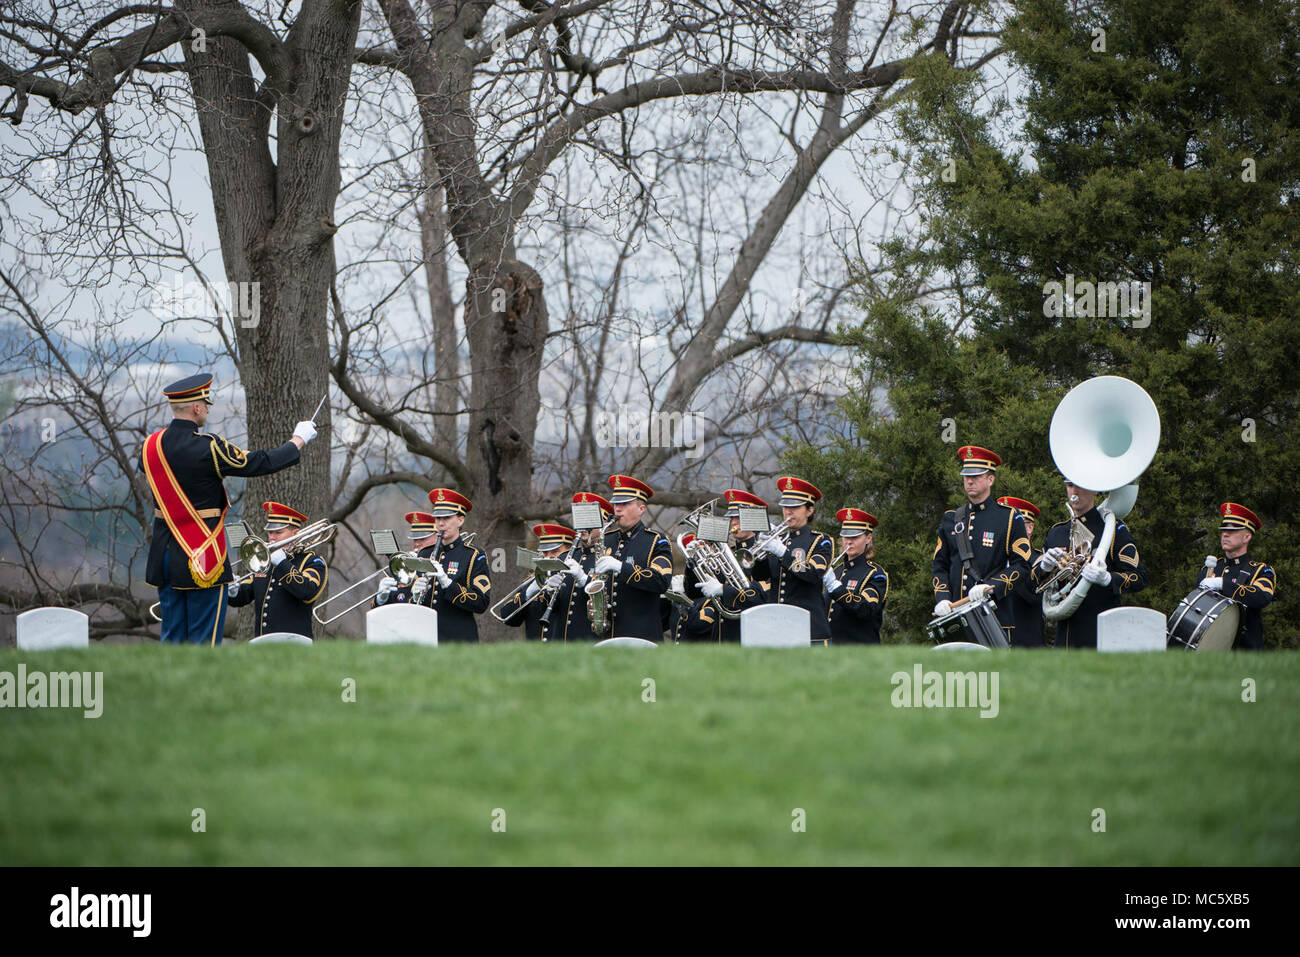 The U.S. Army Band, “Pershing’s Own”, support the full honors funeral of U.S. Army Col. and Estonian Gen. Aleksander Einseln in Section 34 of Arlington National Cemetery, Arlington, Virginia, April 2, 2018.  Born in Estonia, Einseln immigrated to the United States in 1949 and enrolled in the U.S. Army in 1950 at the outbreak of the Korean War. He served with Special Forces in the Vietnam War and retiring as a Colonel in 1985. In 1993, Einseln returned to Estonia at the request of Estonian President Lennart Meri to serve as the first commander of the Estonian Defence Forces, holding this post u Stock Photo